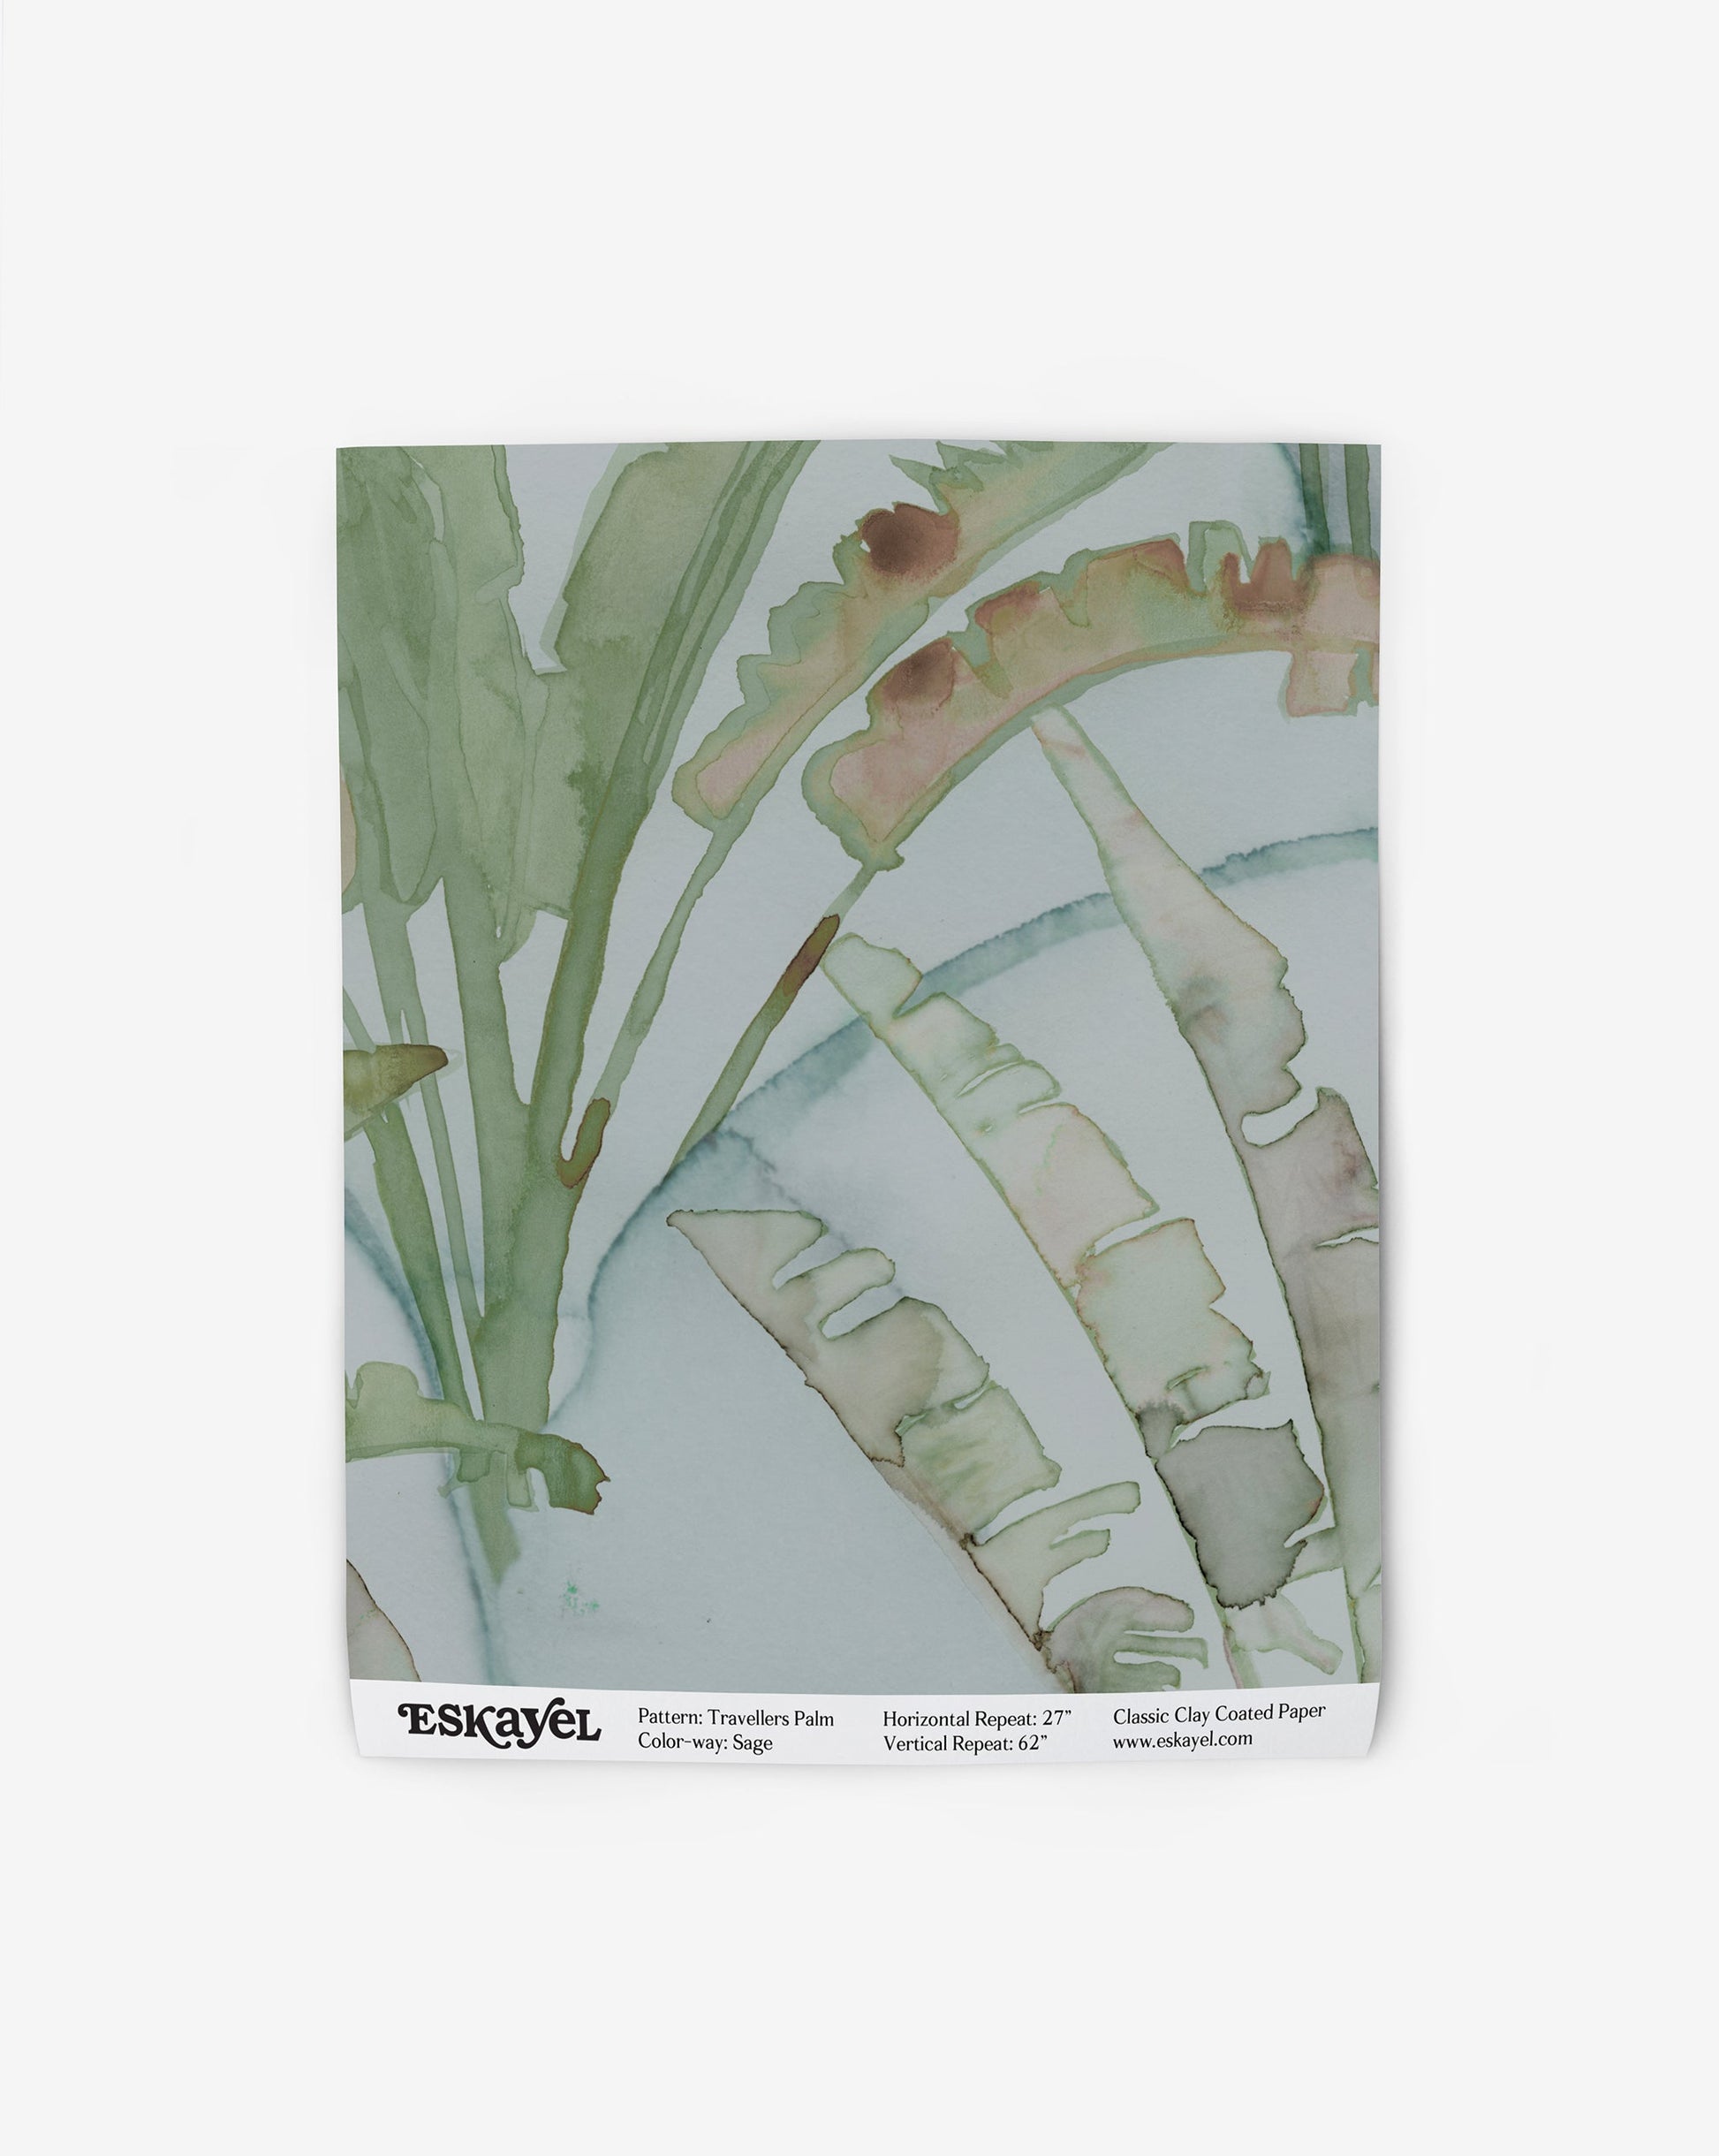 A watercolor painting of a Travelers Palm Wallpaper Sage on a napkin